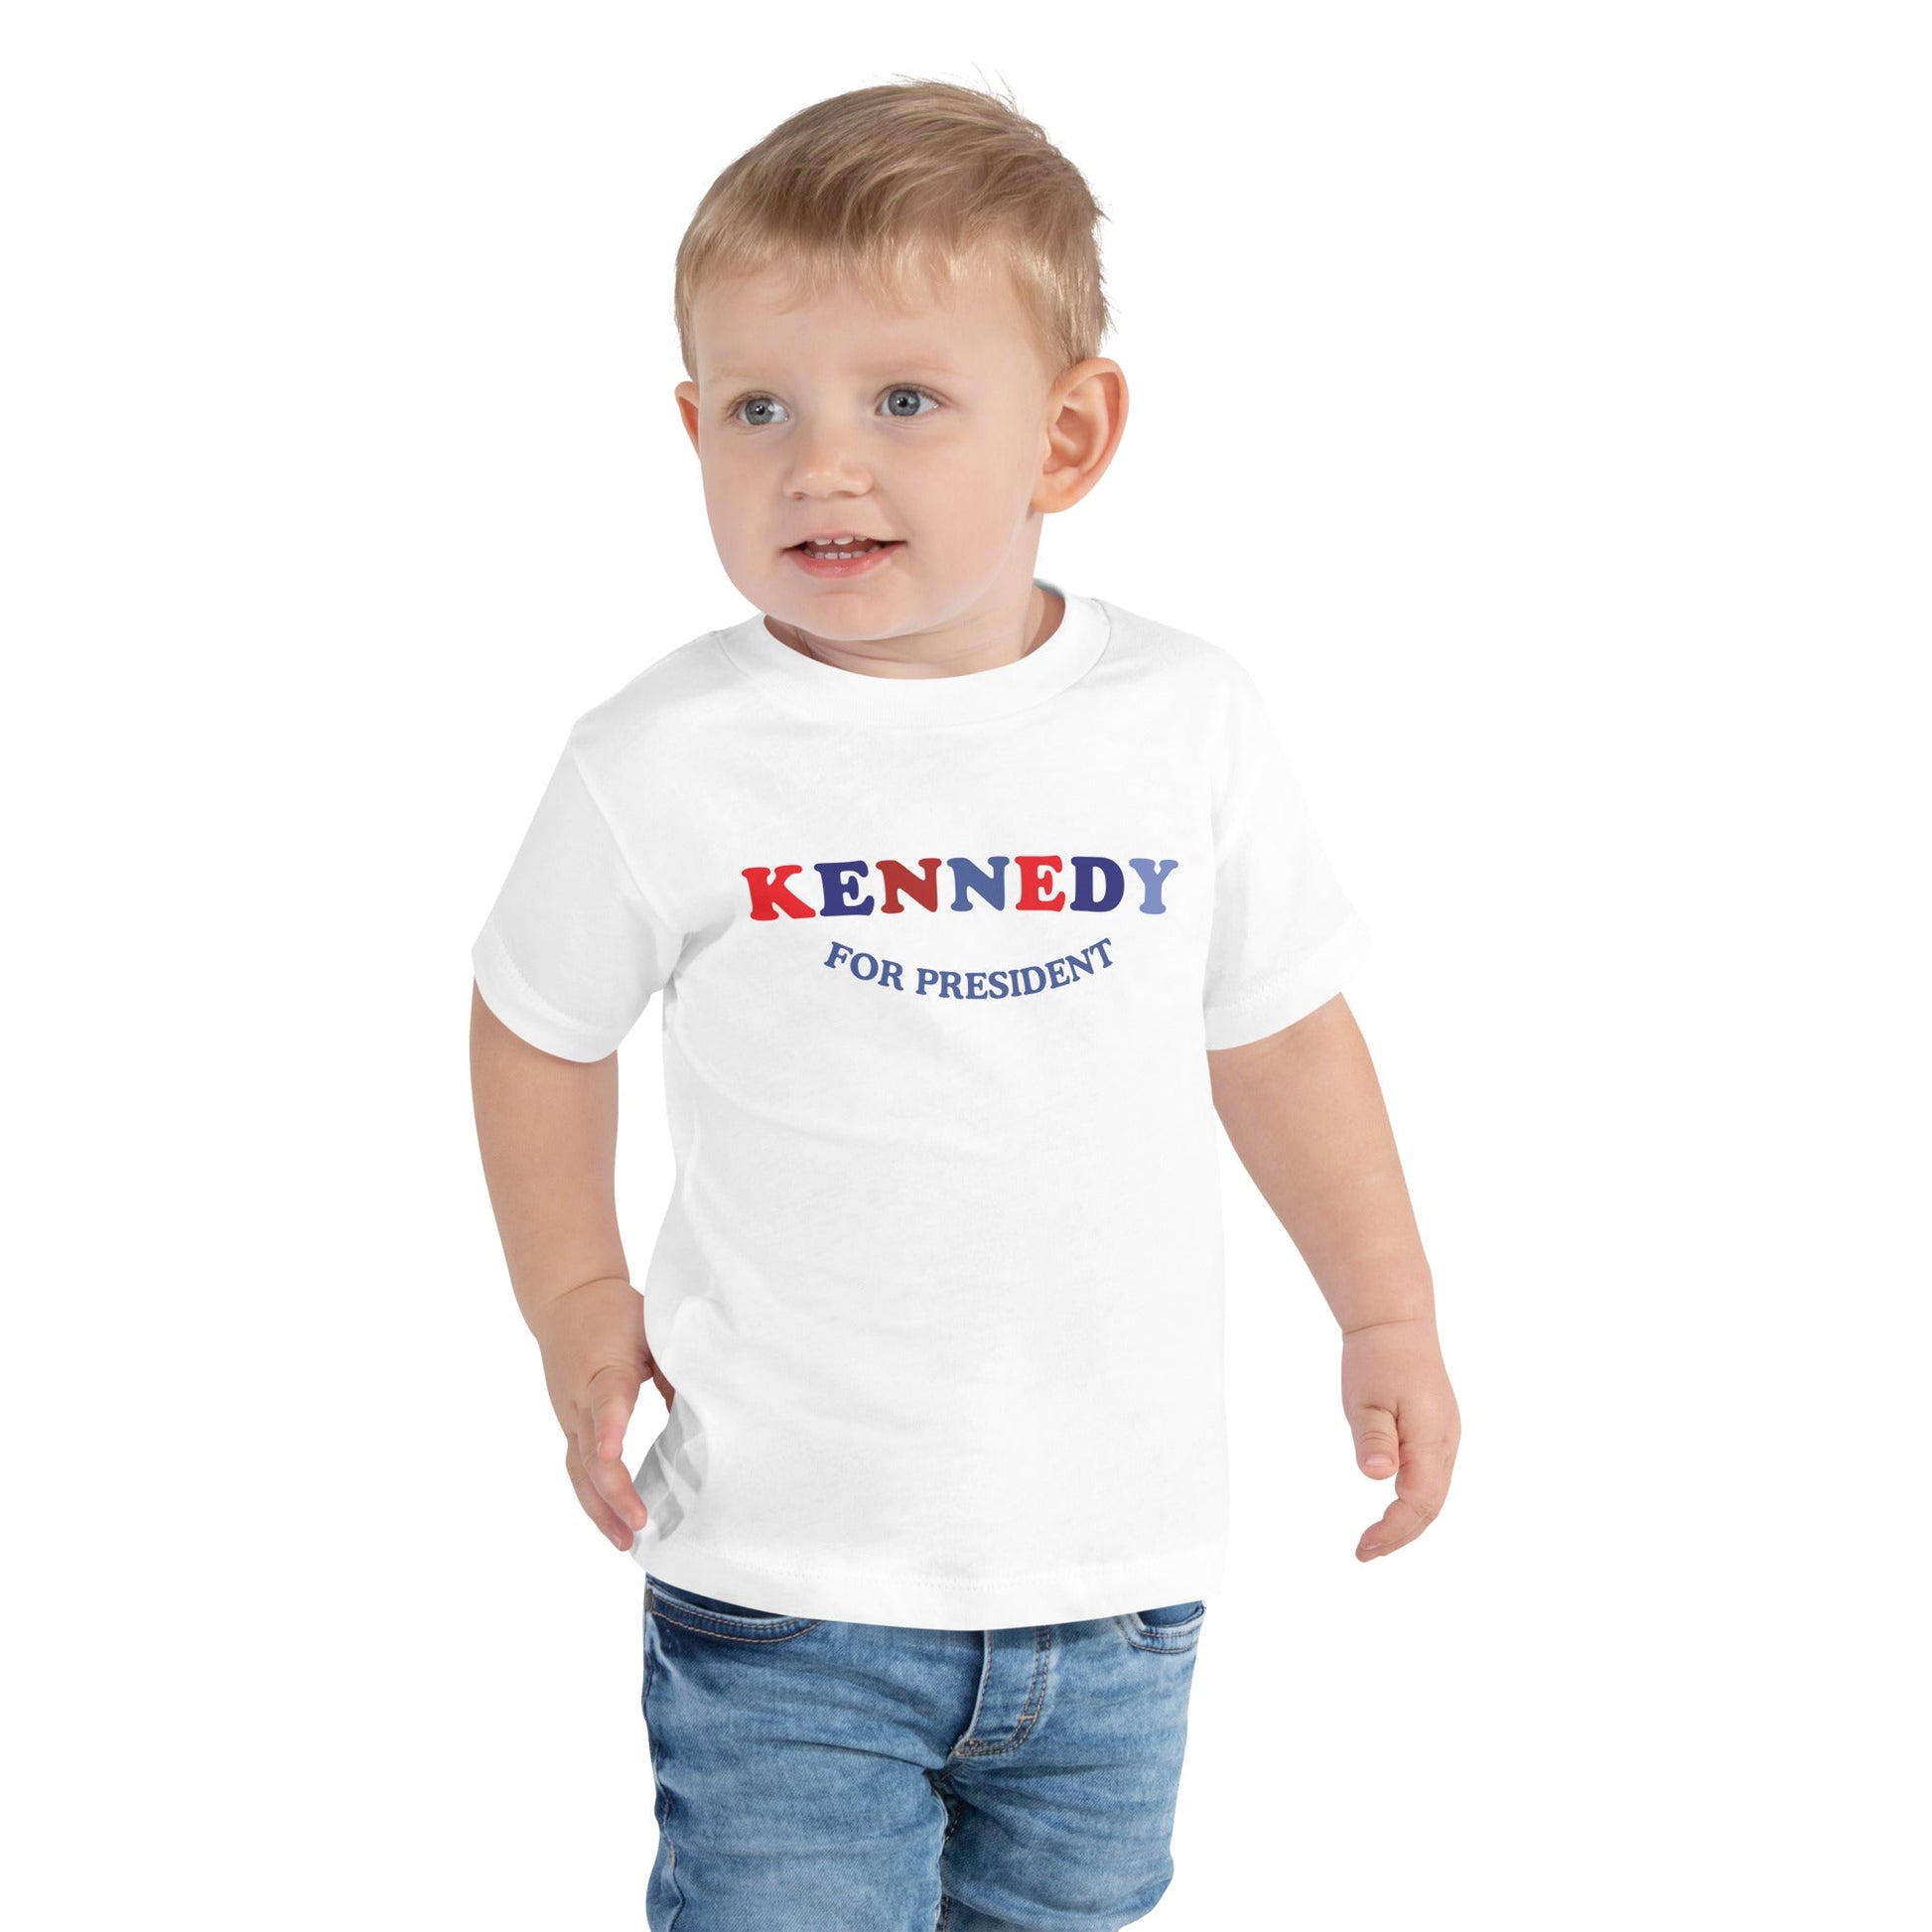 Kennedy for President Toddler Tee - TEAM KENNEDY. All rights reserved